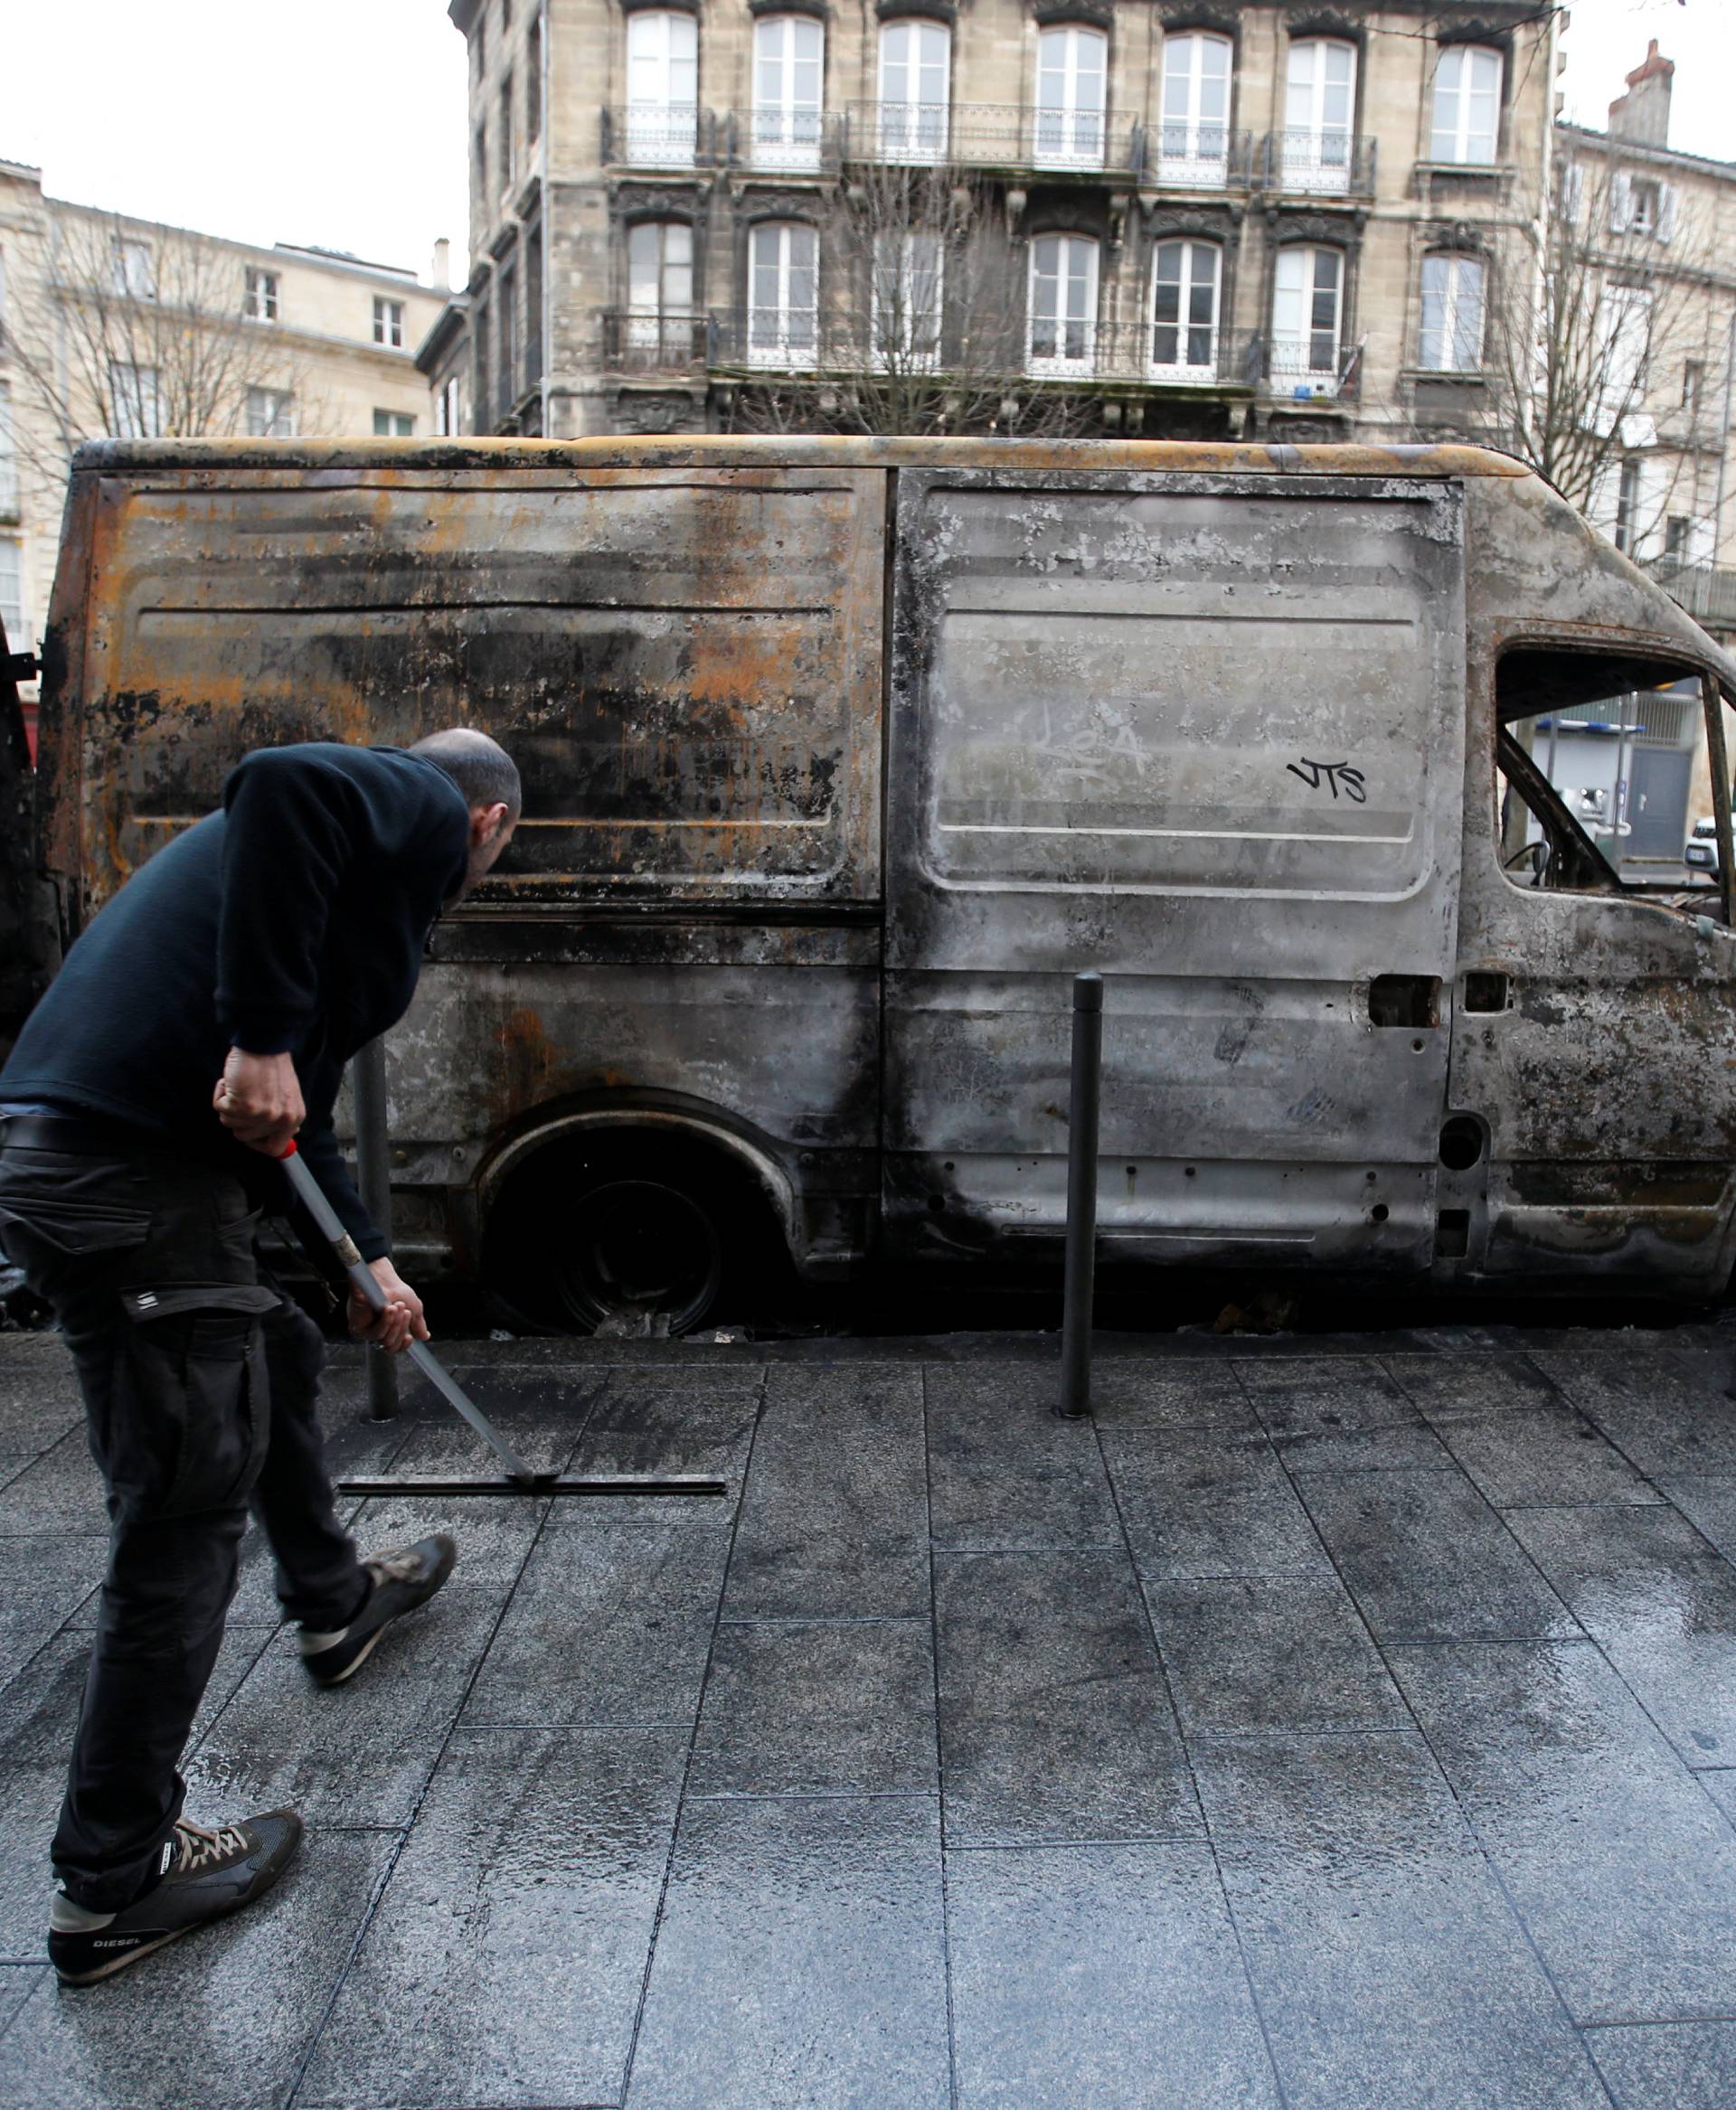 A vandalized truck is seen the day after clashes during a national day of protest by the "yellow vests" movement in Bordeaux